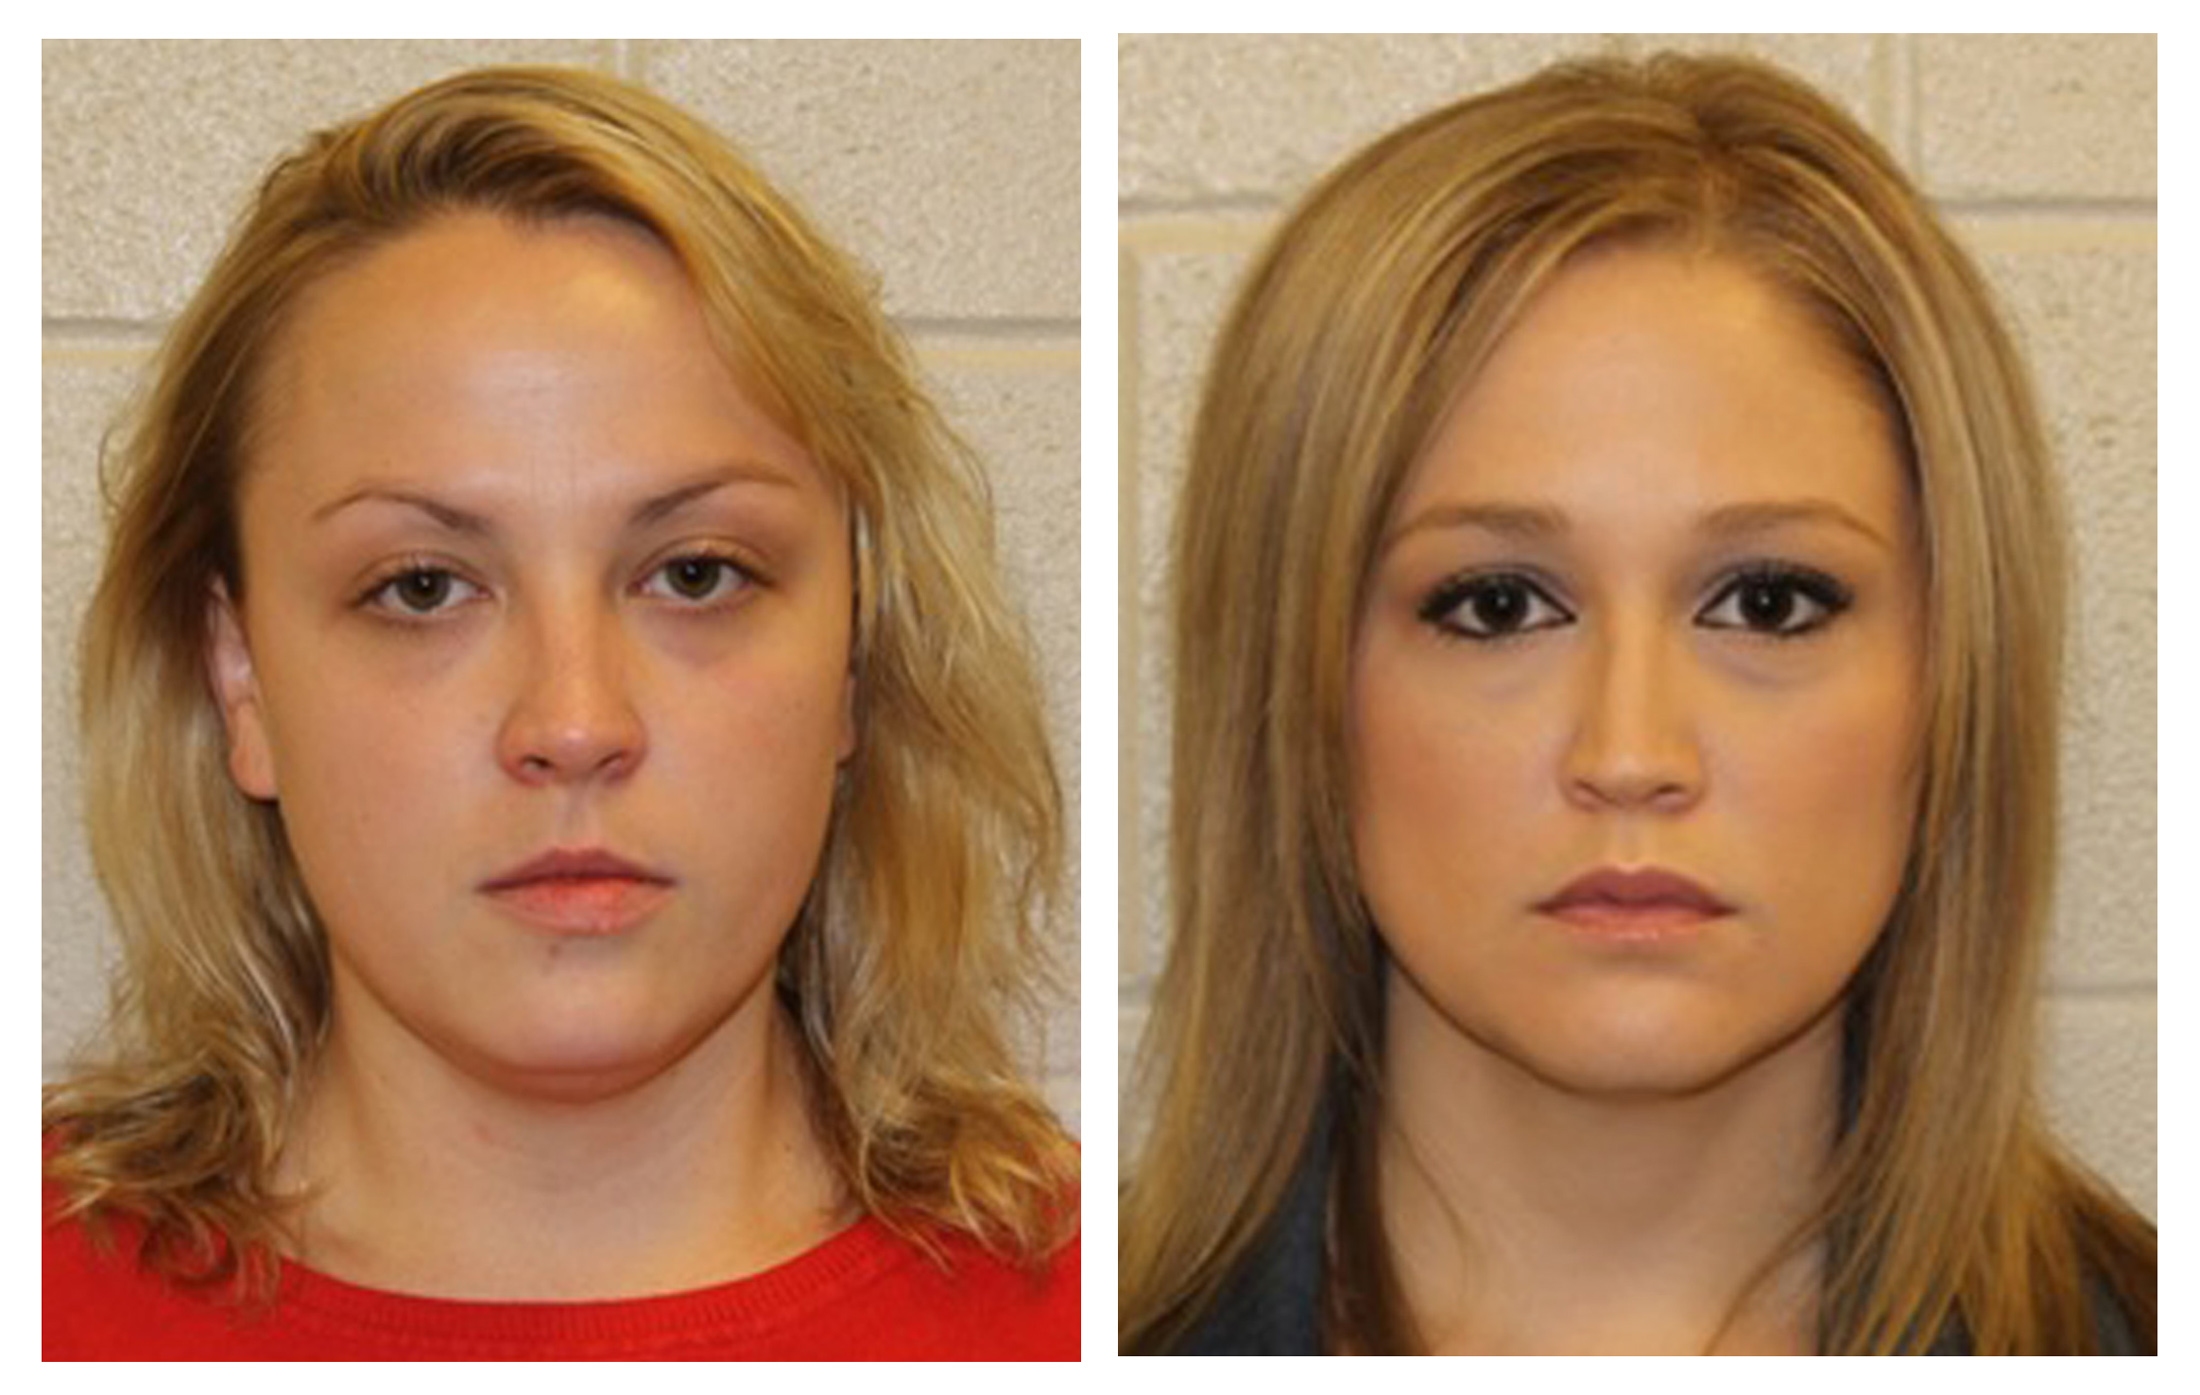 Two female Louisiana teachers accused of group sex with